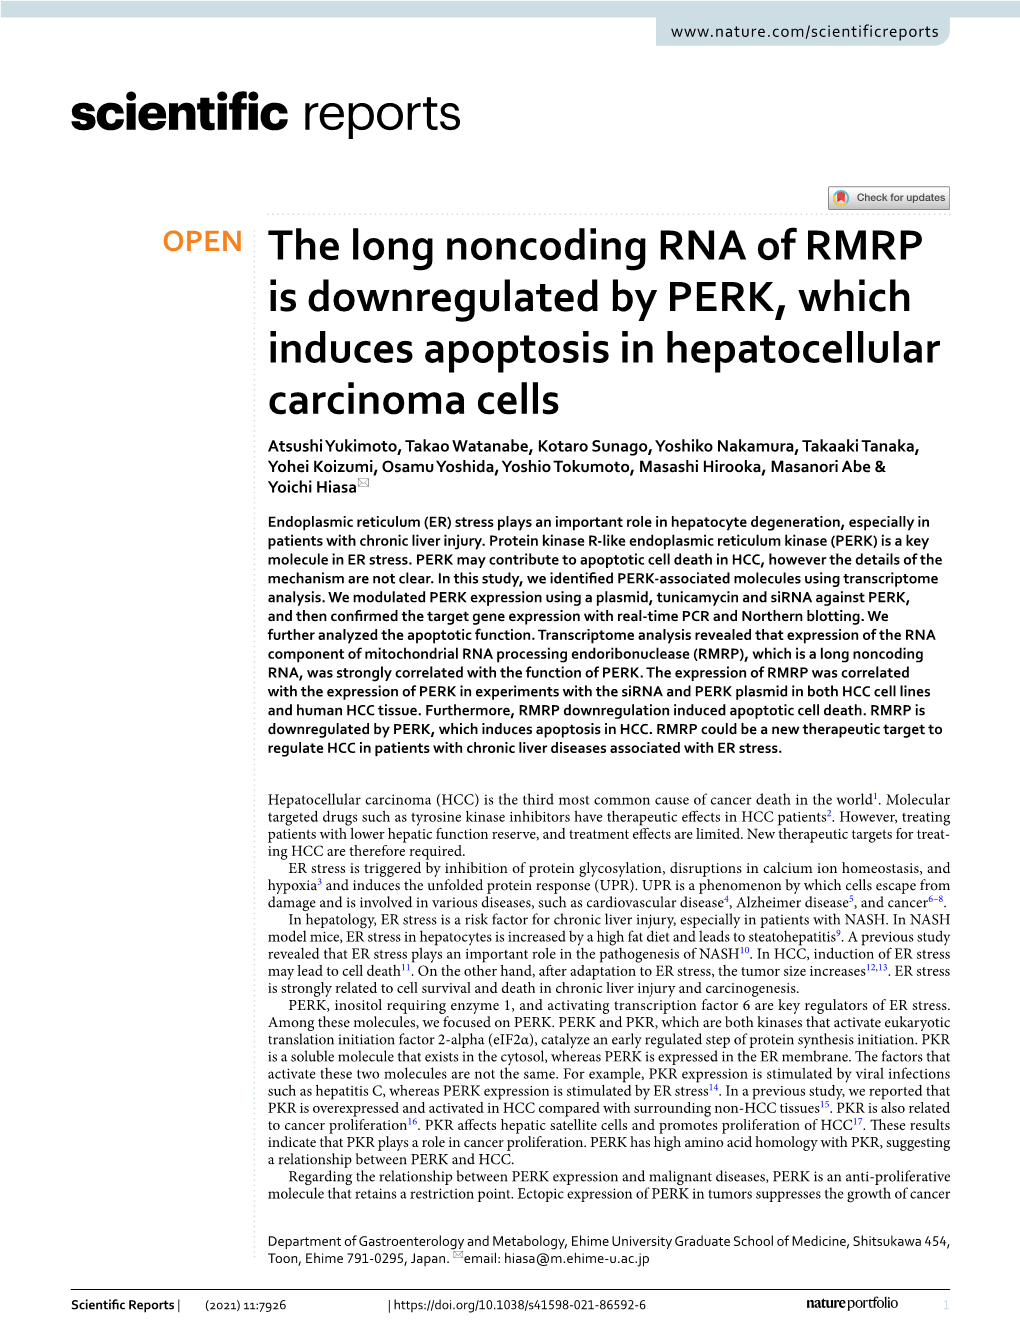 The Long Noncoding RNA of RMRP Is Downregulated by PERK, Which Induces Apoptosis in Hepatocellular Carcinoma Cells